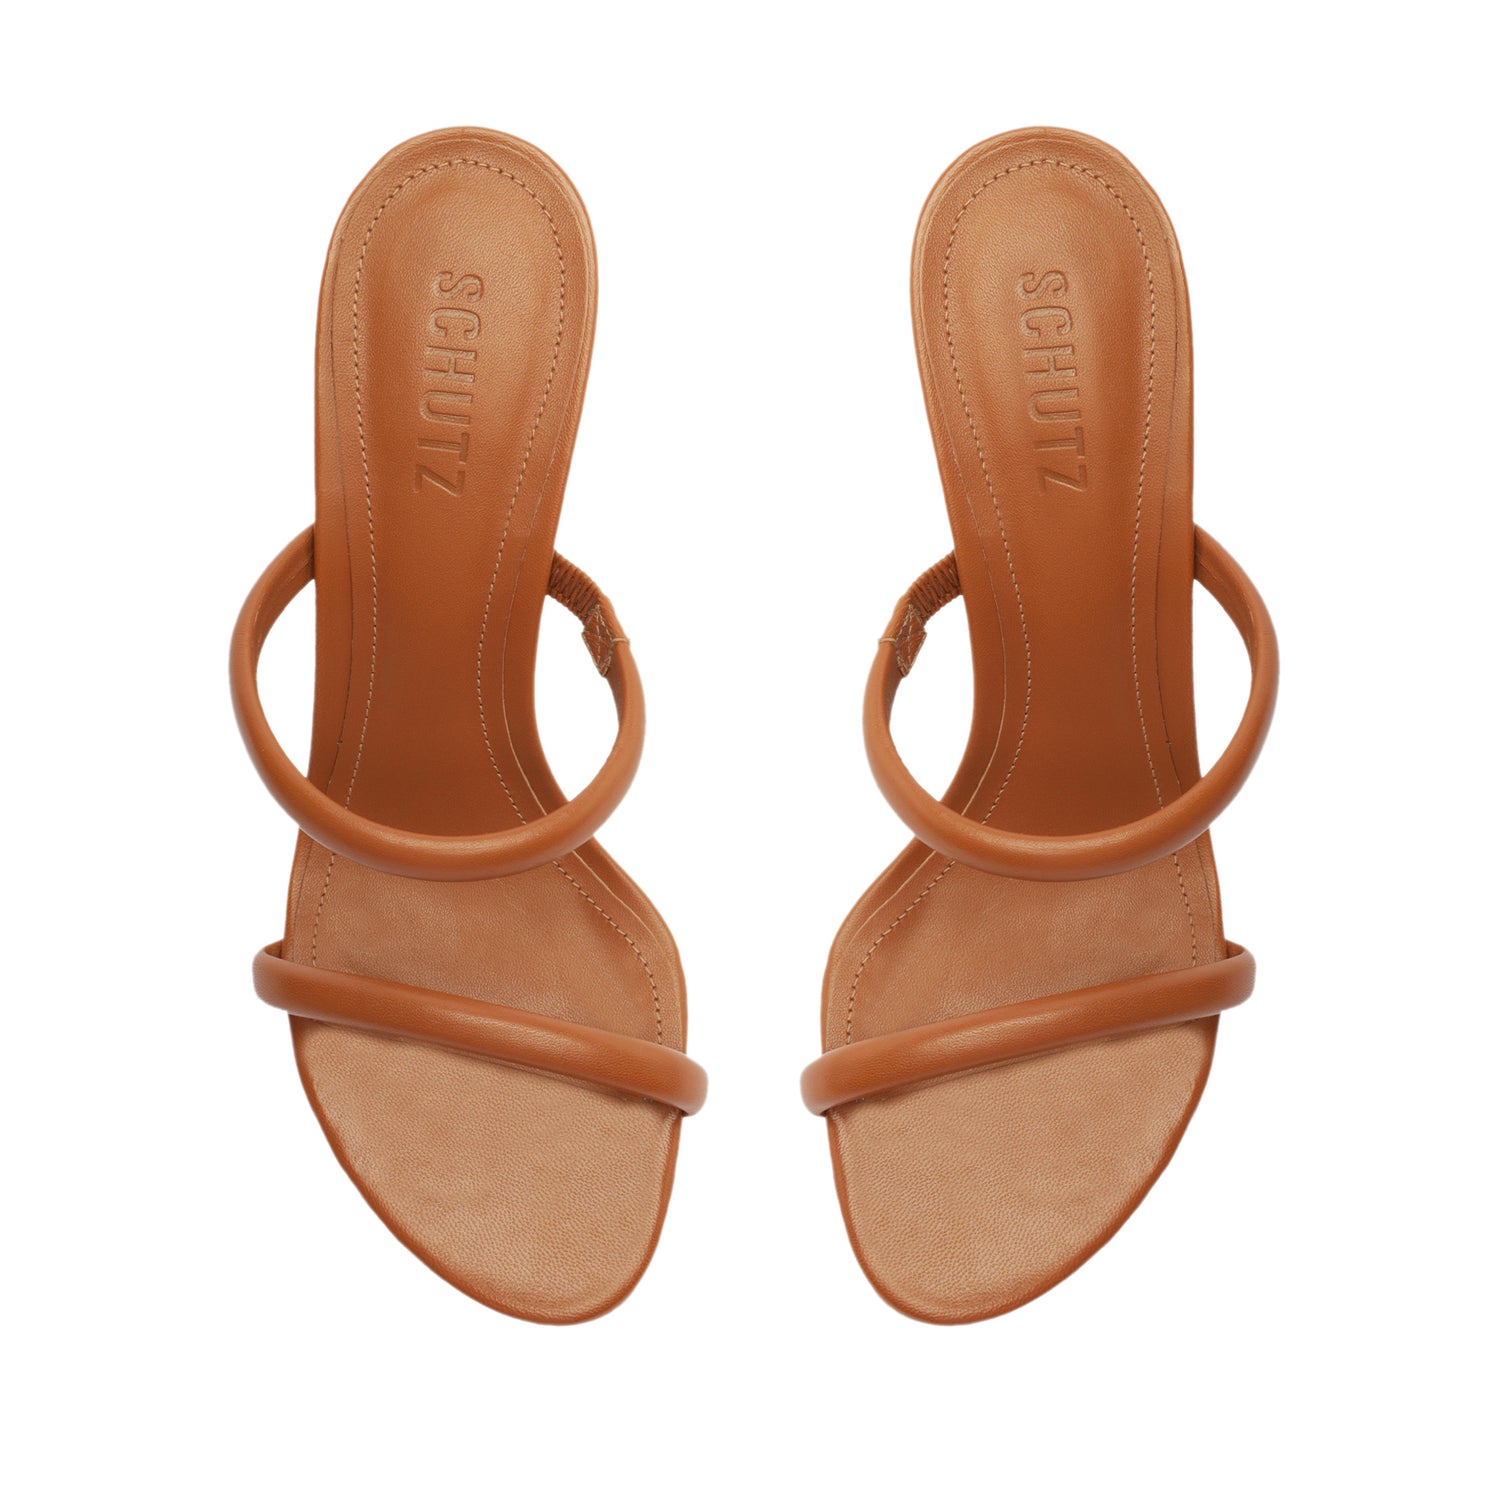 Taliah Nappa Leather Sandal Sandals Spring 24    - Schutz Shoes